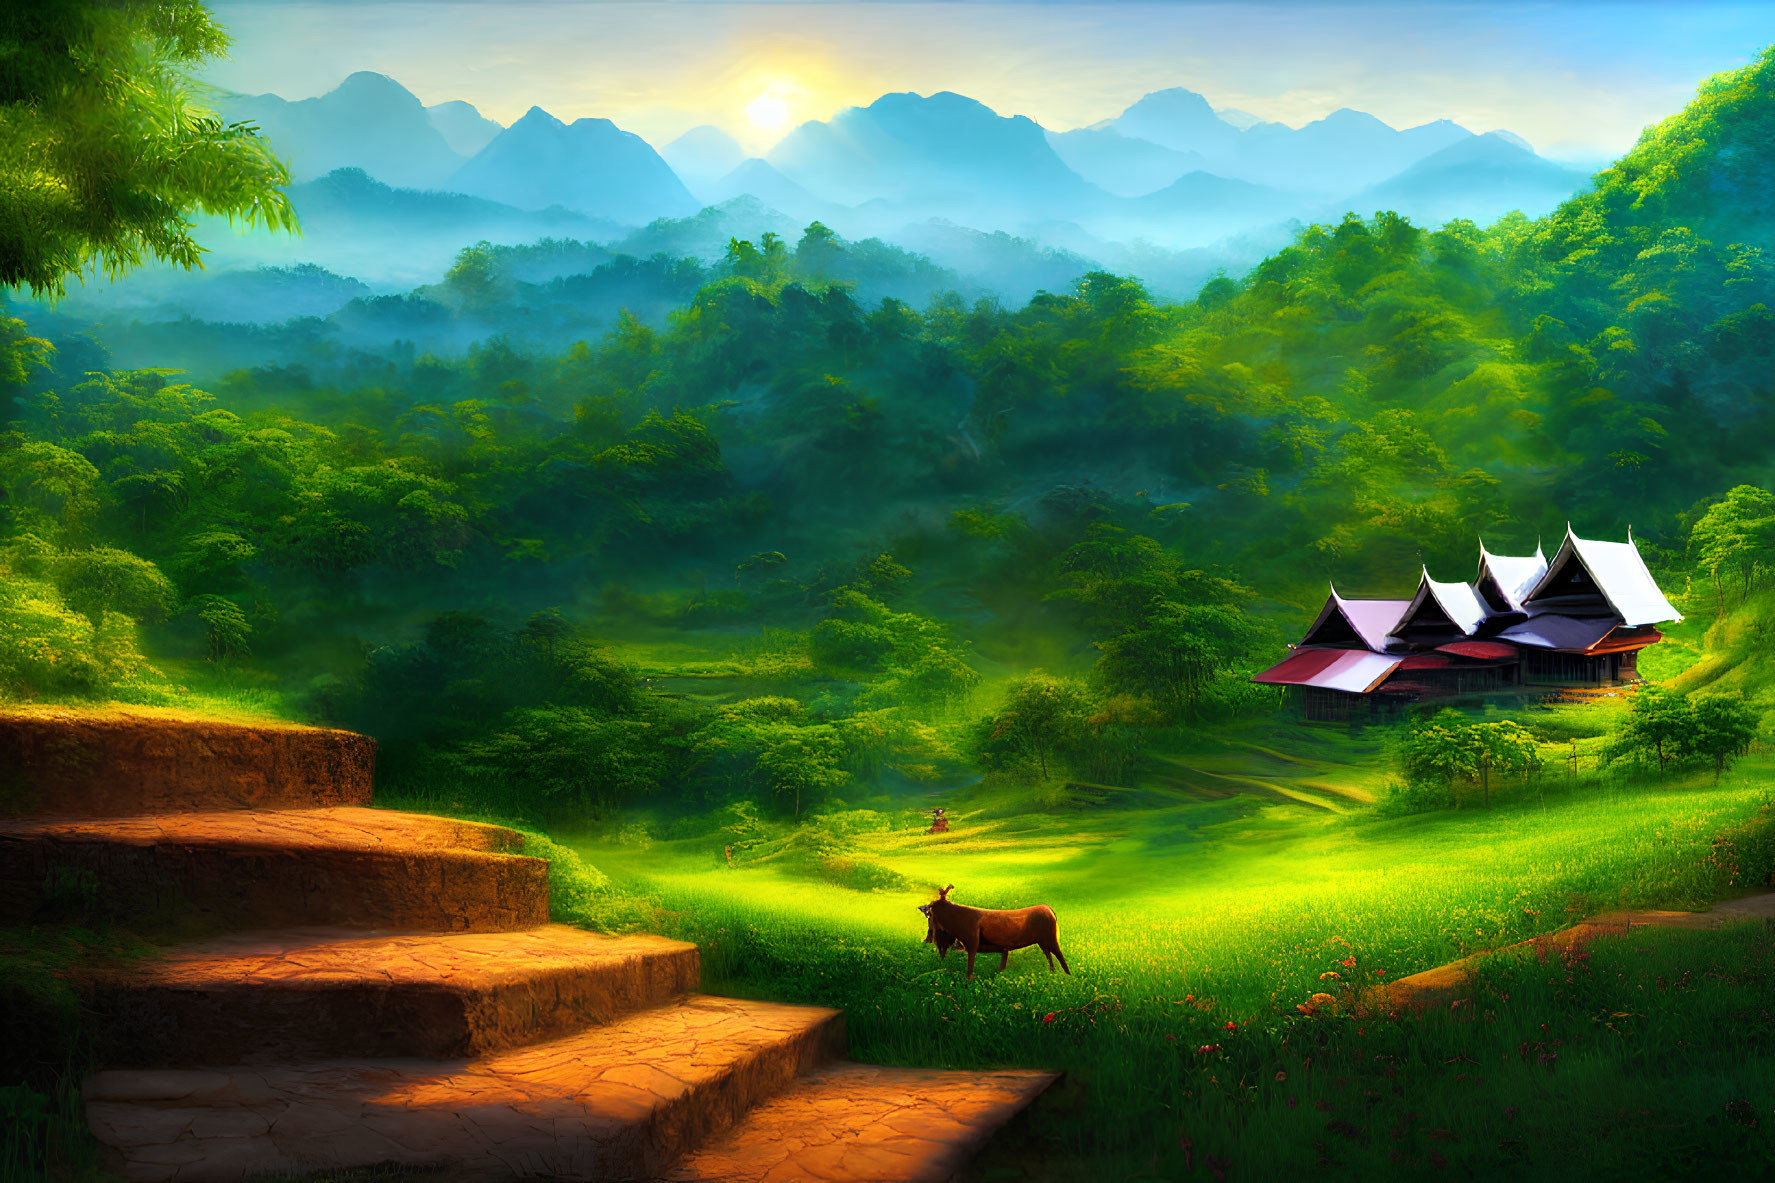 Tranquil landscape with sunlit mountains, traditional houses, cow grazing, and stone steps